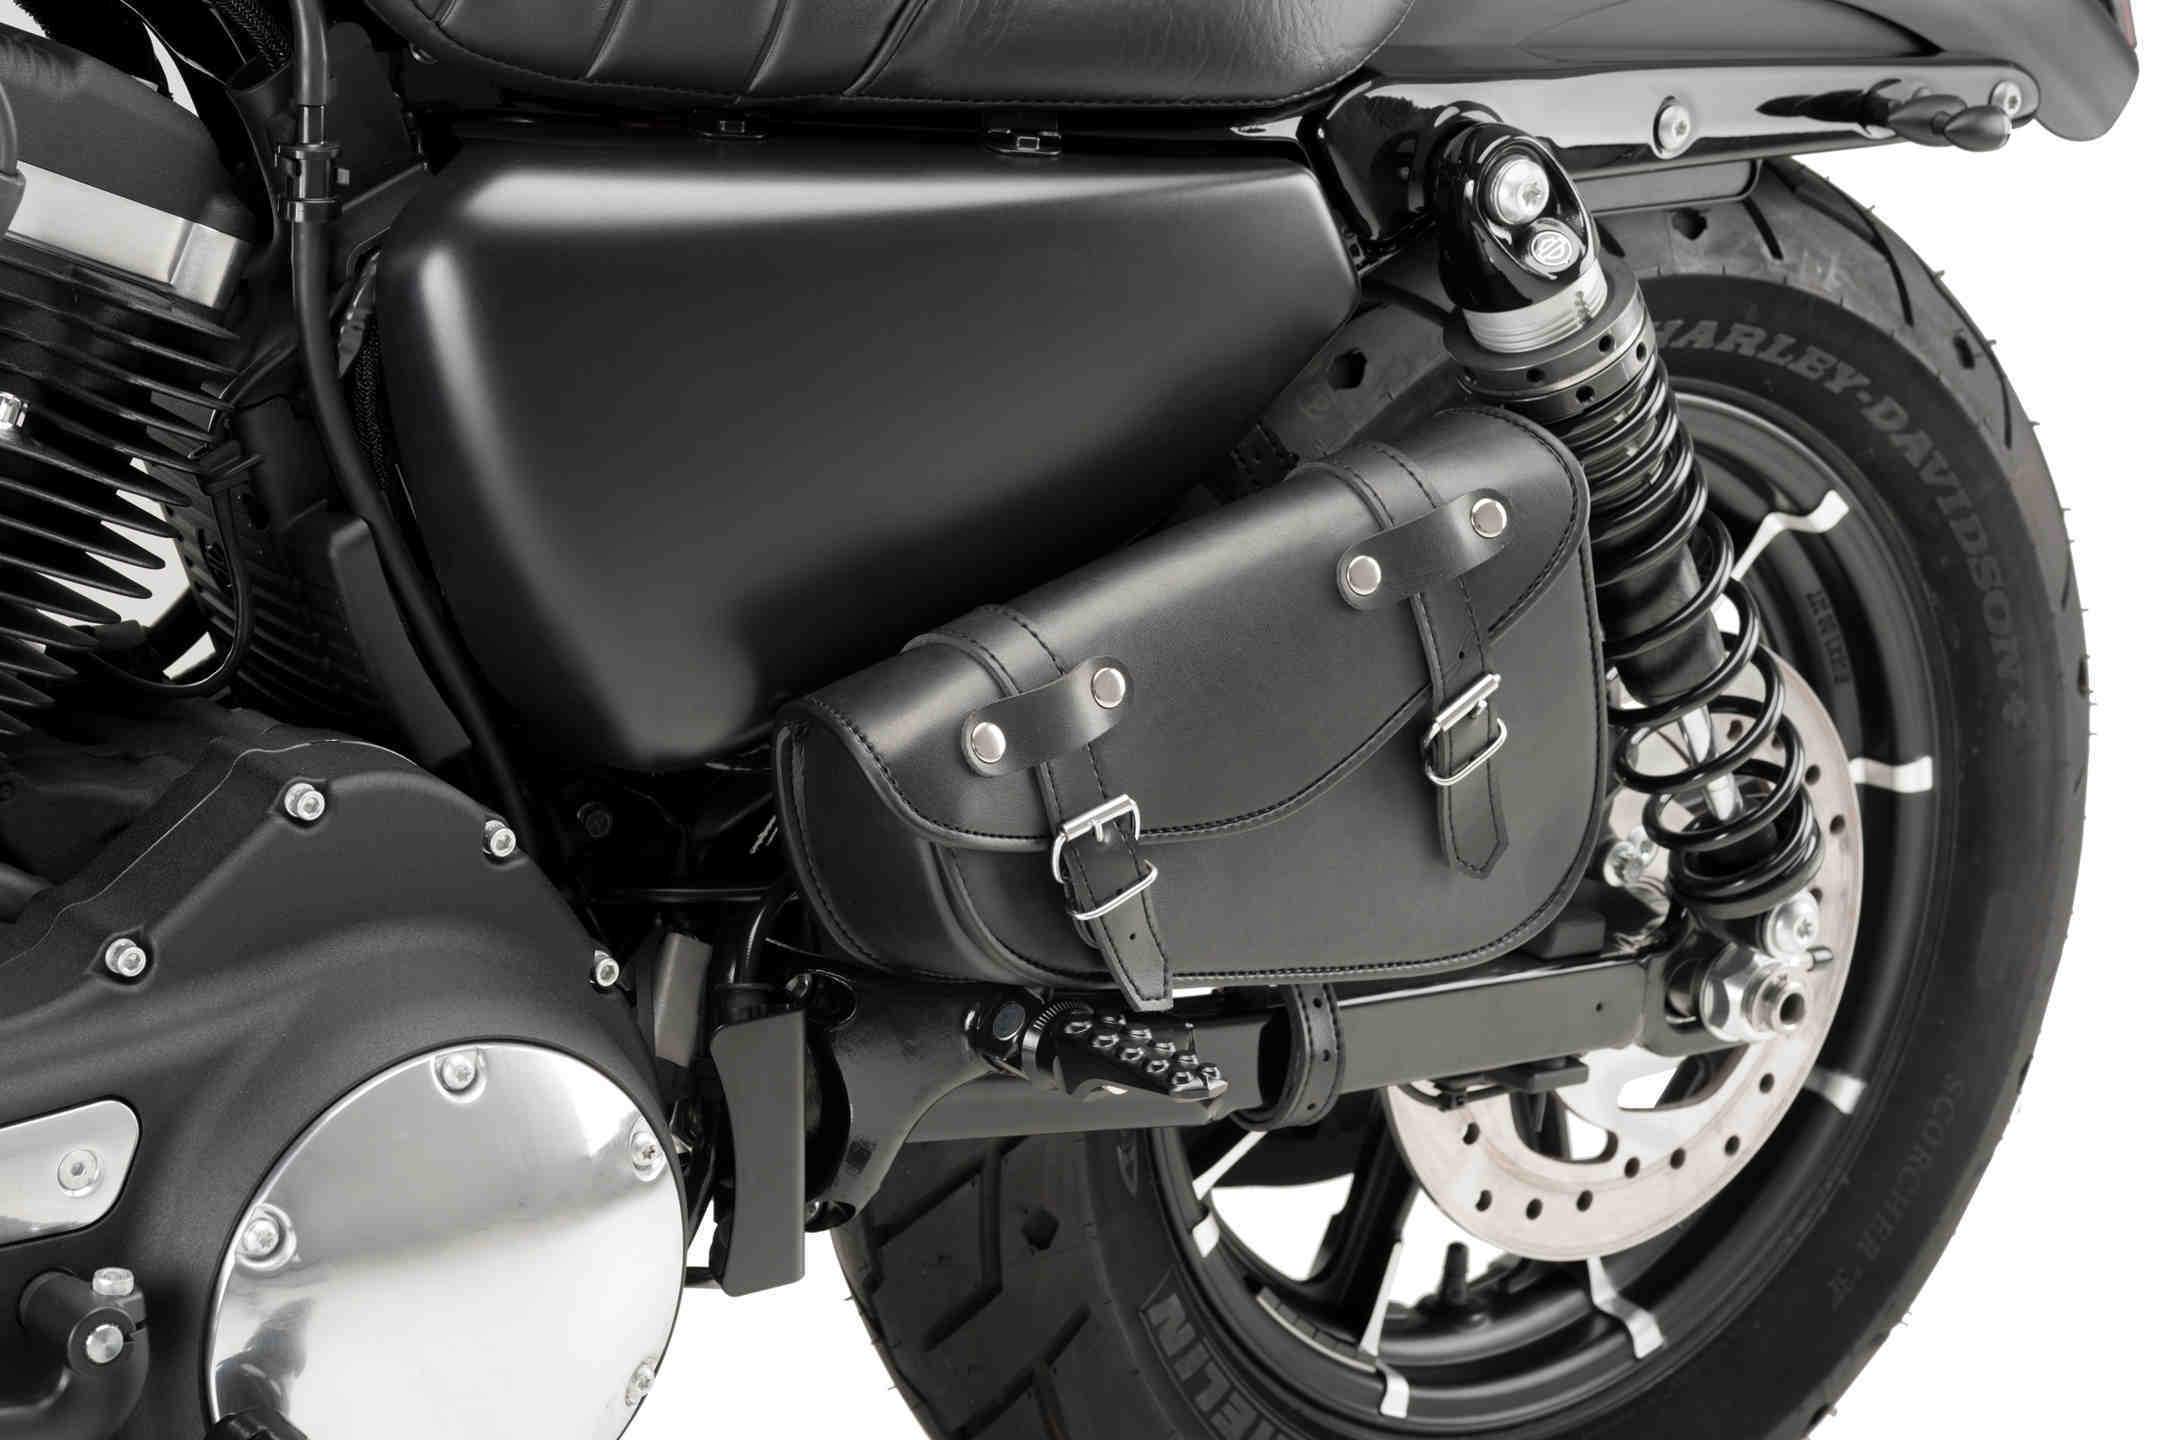 Customacces Detroit Left Saddlebag No Support Included | Black | Harley Davidson Sportster Iron (XL883N) 1995>2019-XAP0003N-Storage-Pyramid Motorcycle Accessories